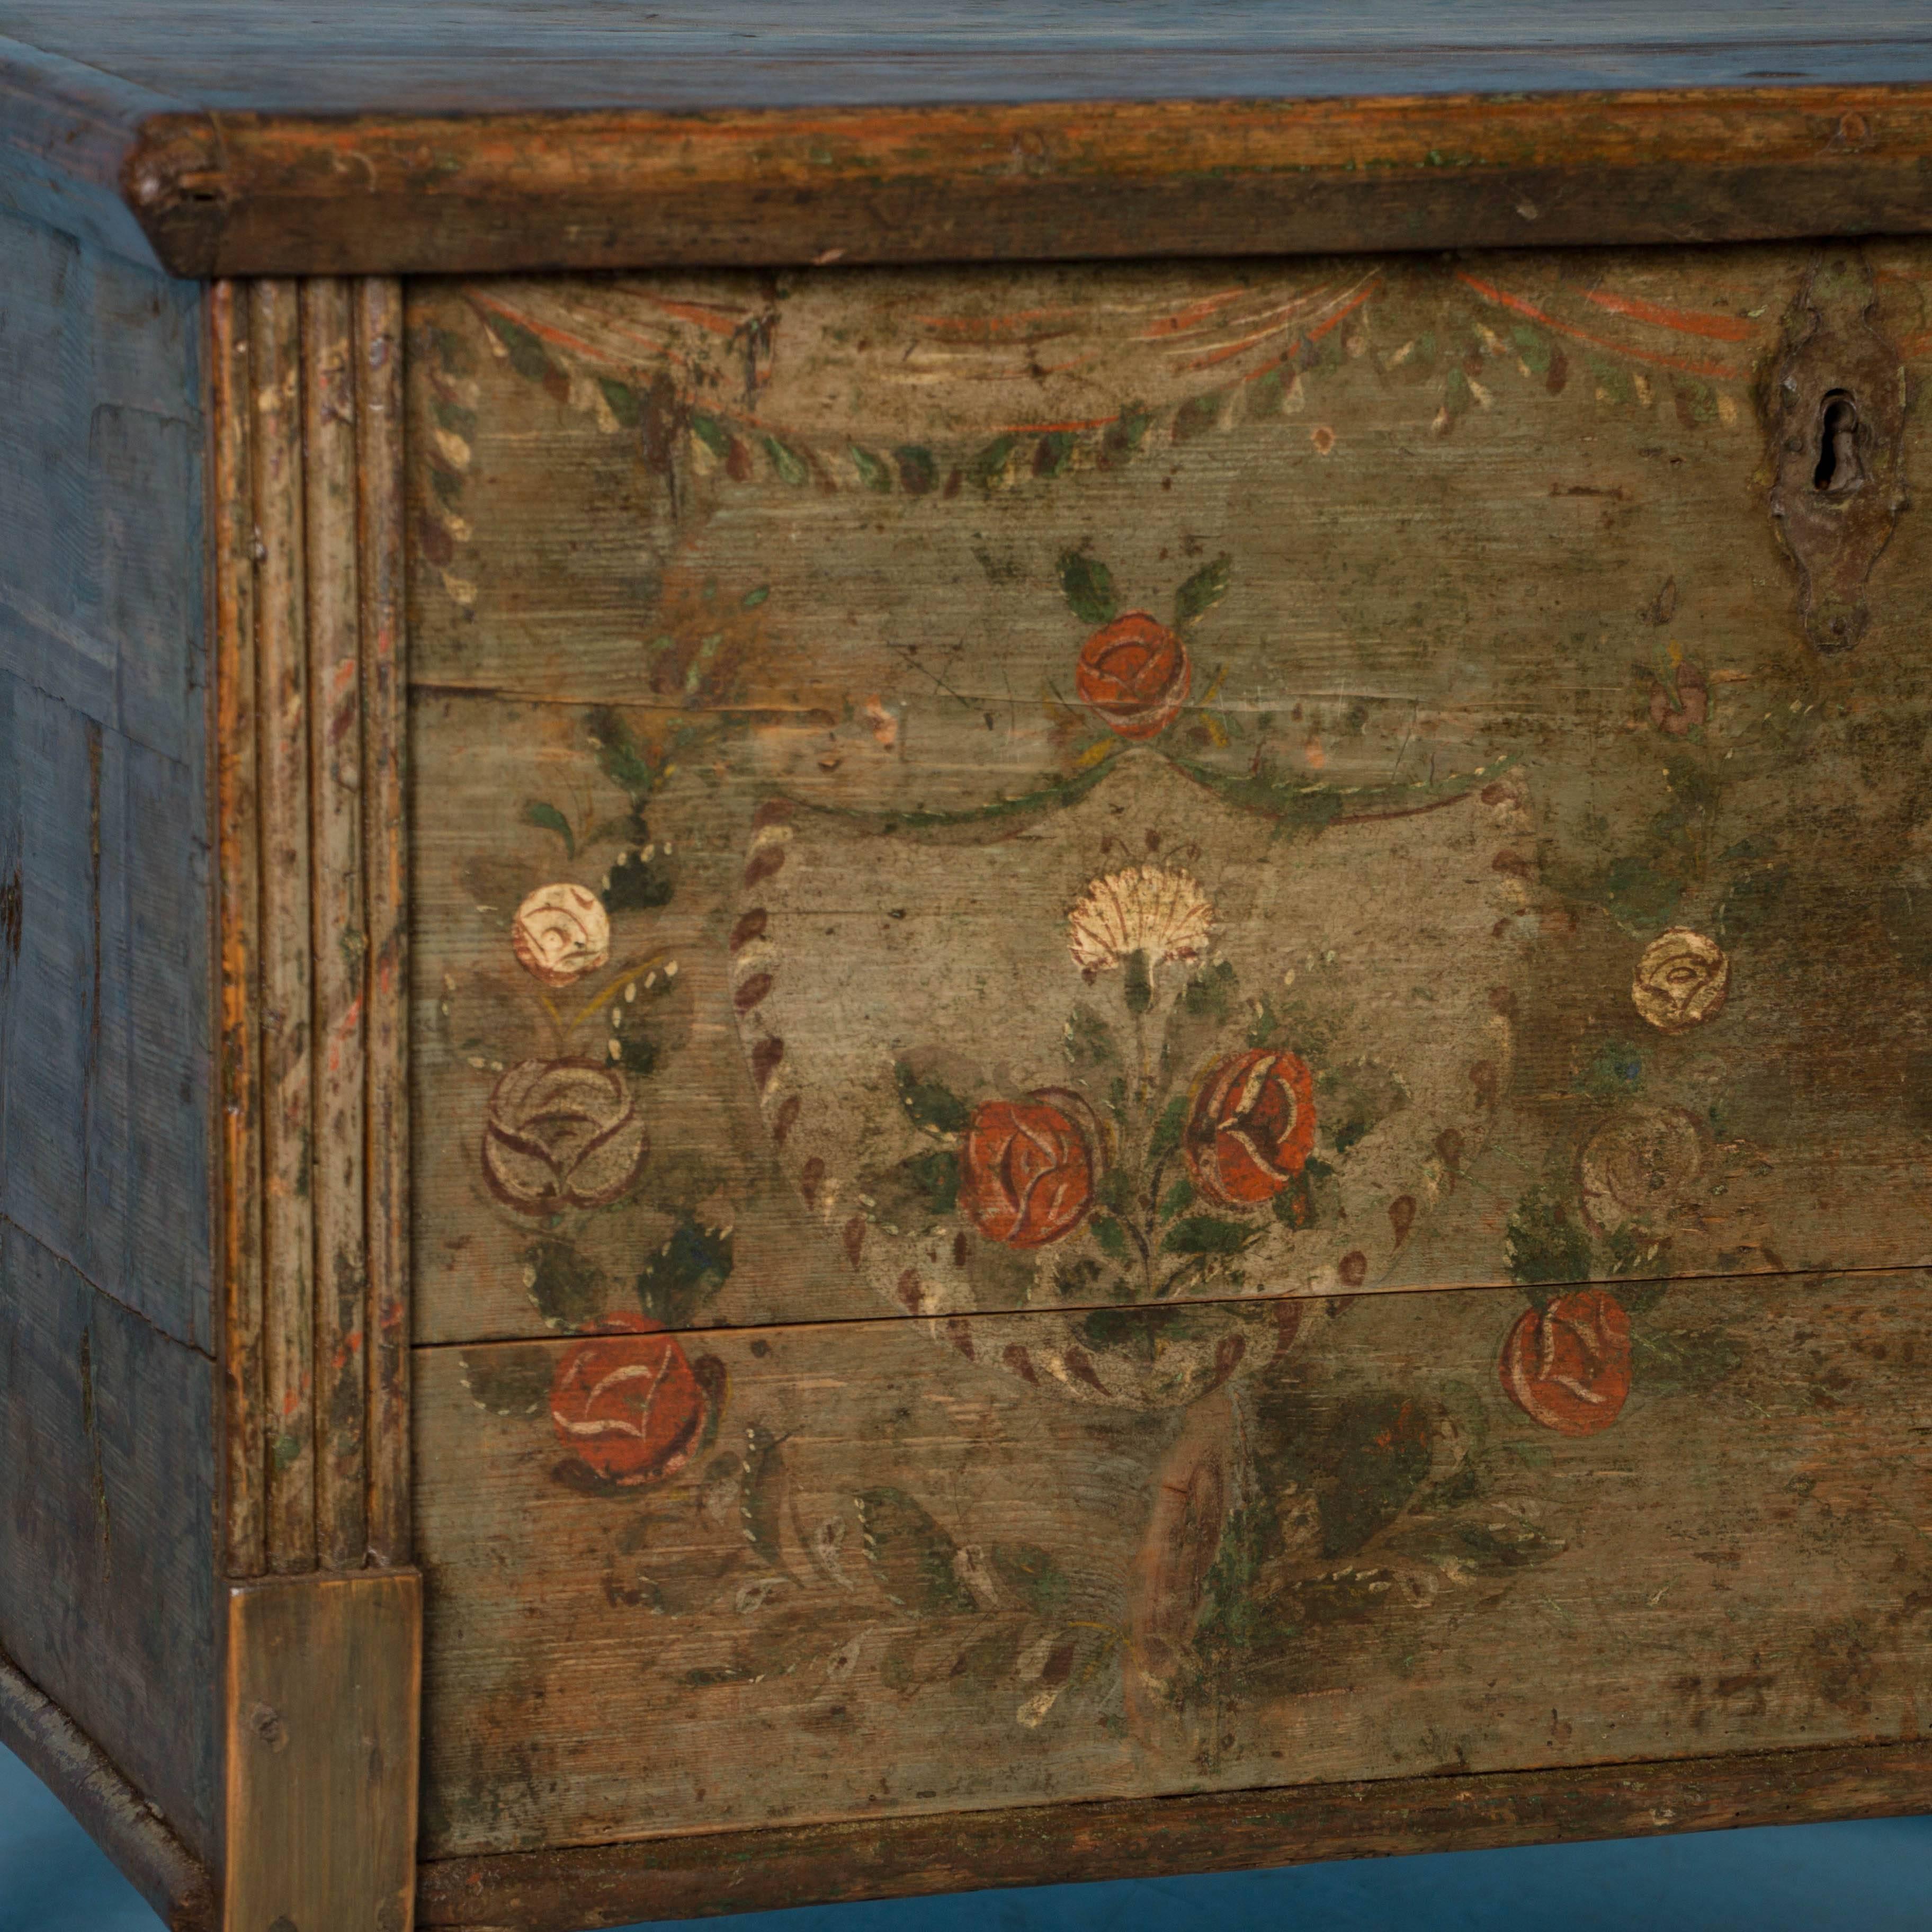 19th Century Flat Top Green Trunk with Original Painted Floral Details, circa 1840-1860